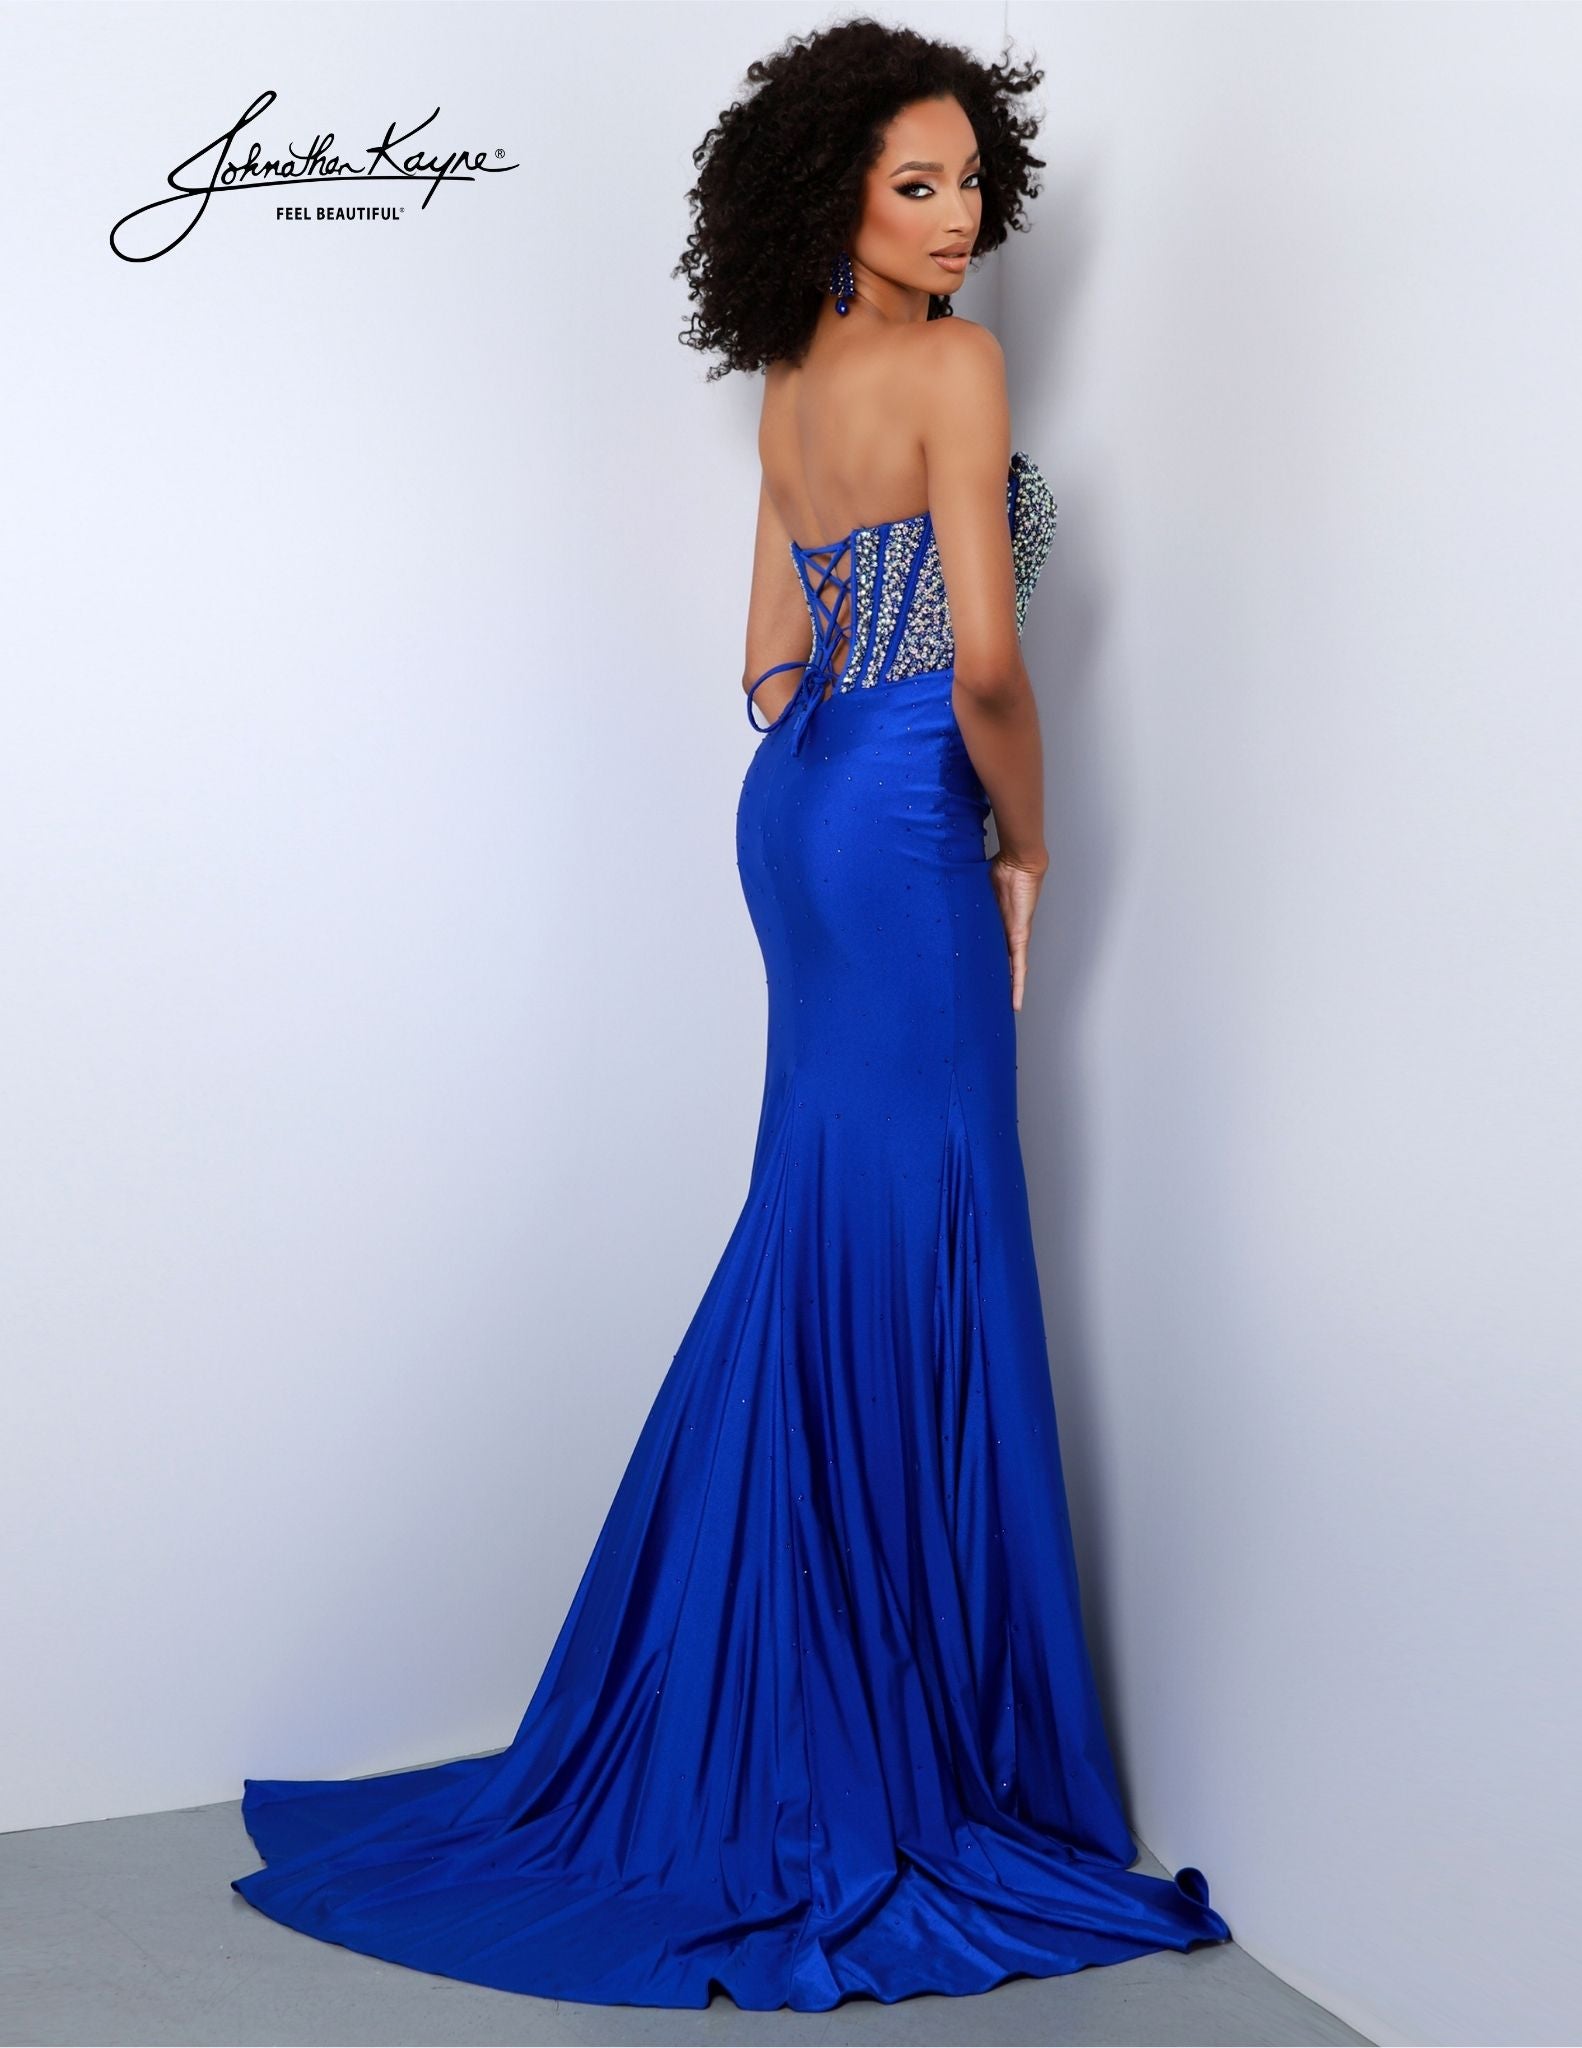 This Johnathan Kayne 2820 Long Formal Gown is perfect for the special occasion. The sparkling beaded corset showcases a sophisticated silhouette and the long slit train adds an air of drama. Perfect for pageants, prom, and more!